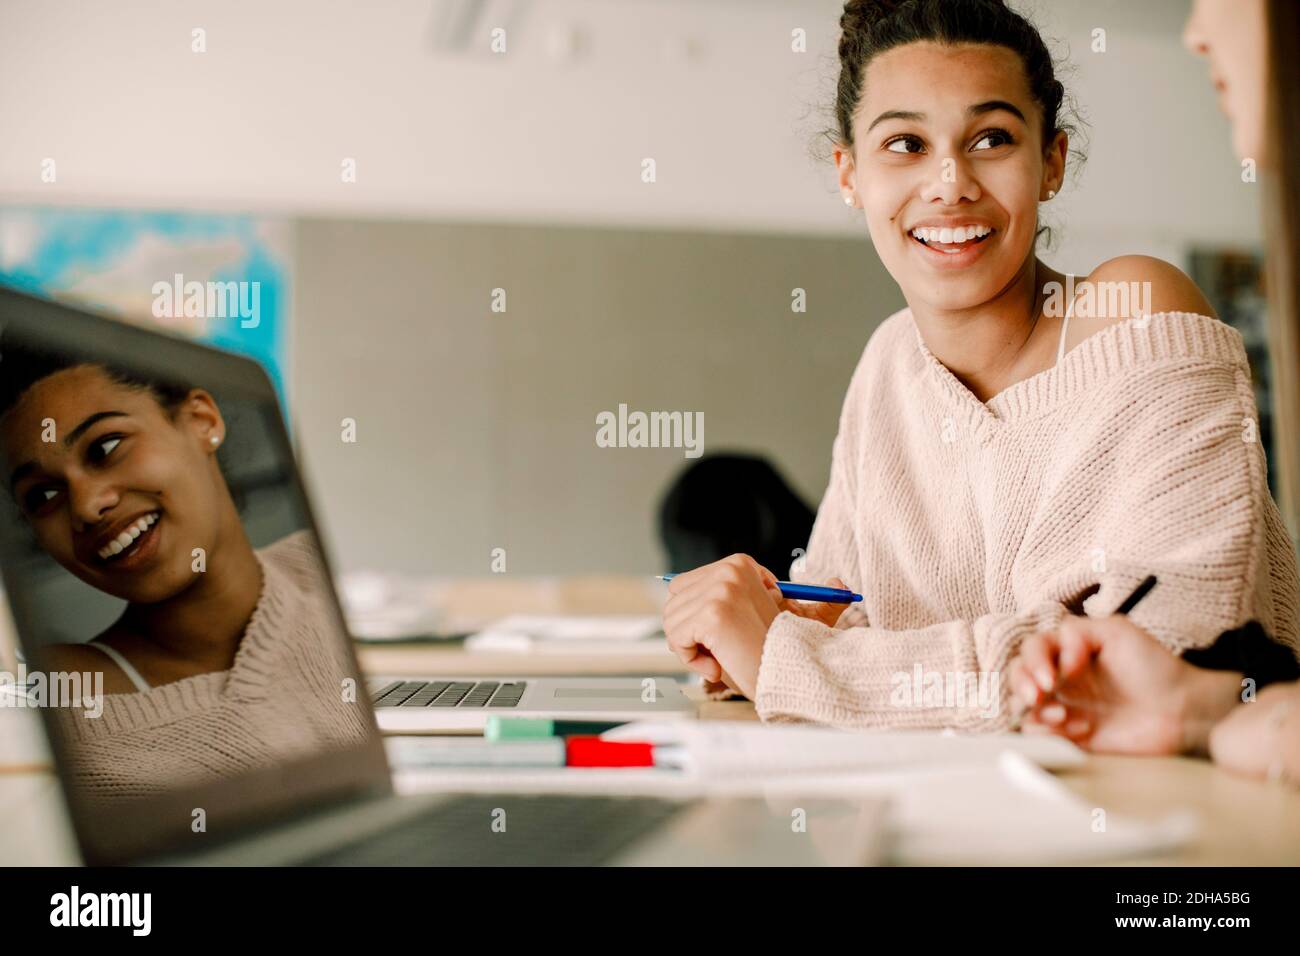 Smiling teenager studying with friend while sitting by table in classroom Stock Photo